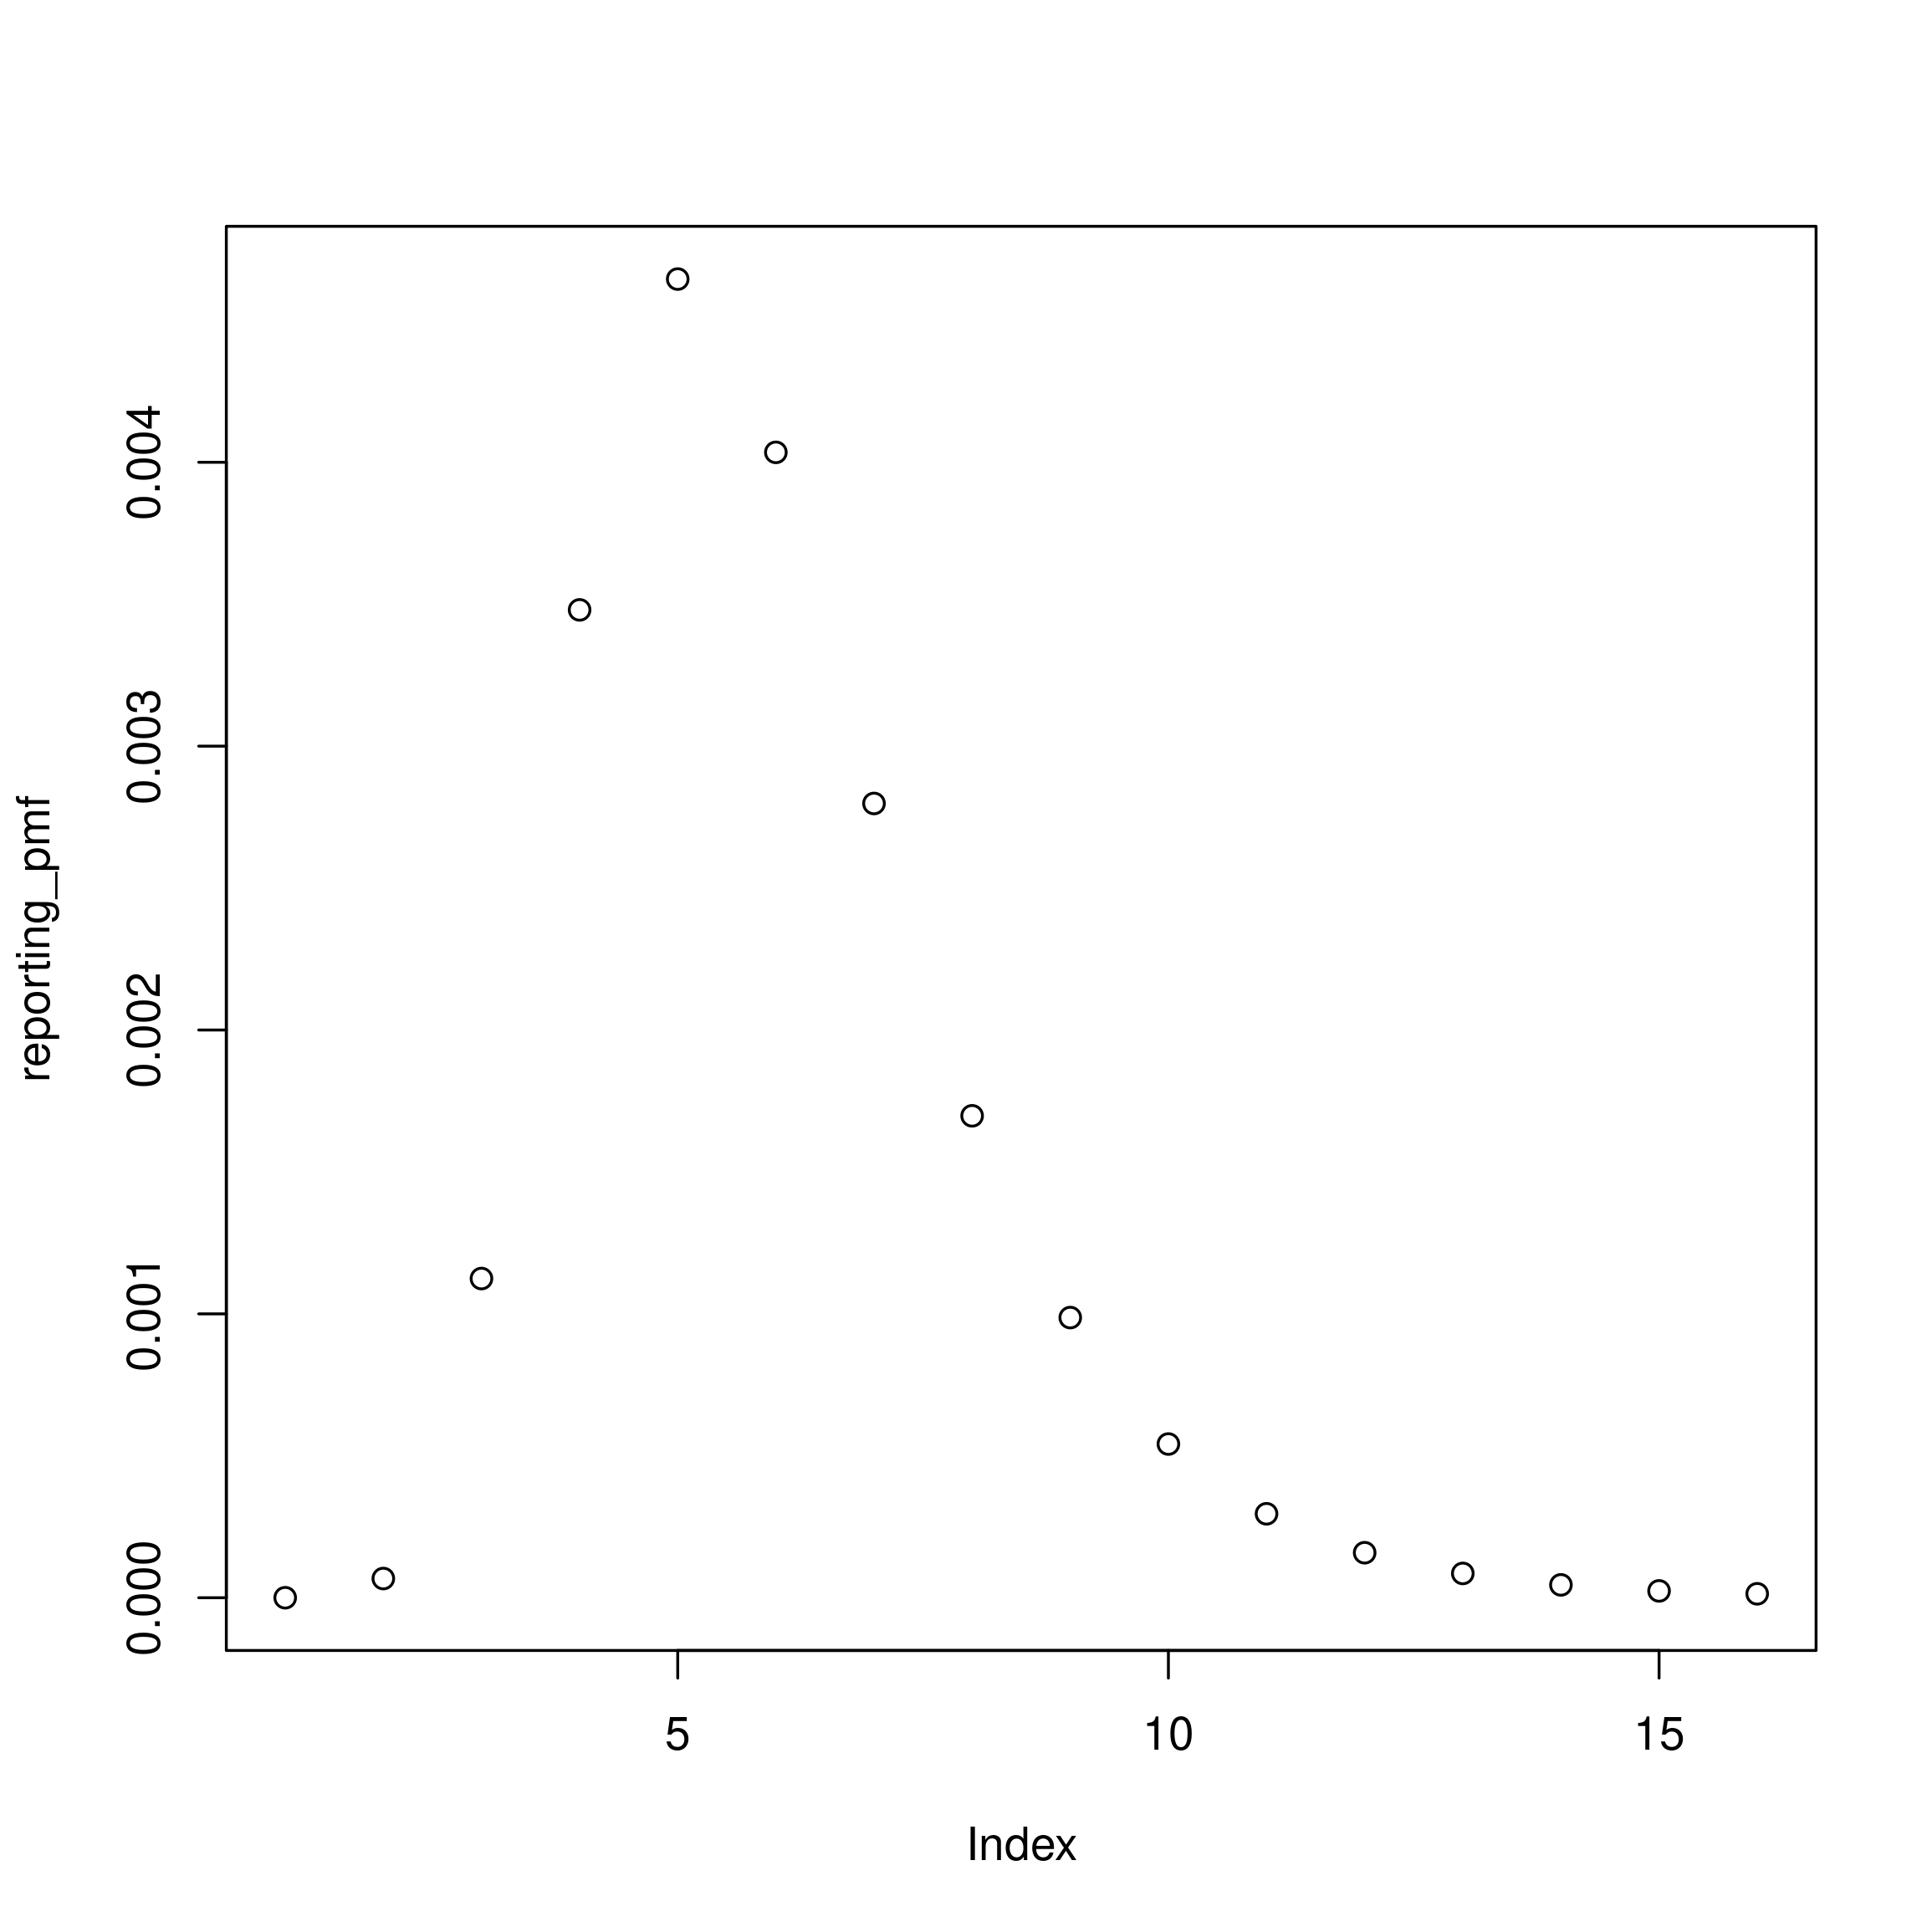 Probability mass function of the assumed latent (unobserved) reporting distribution